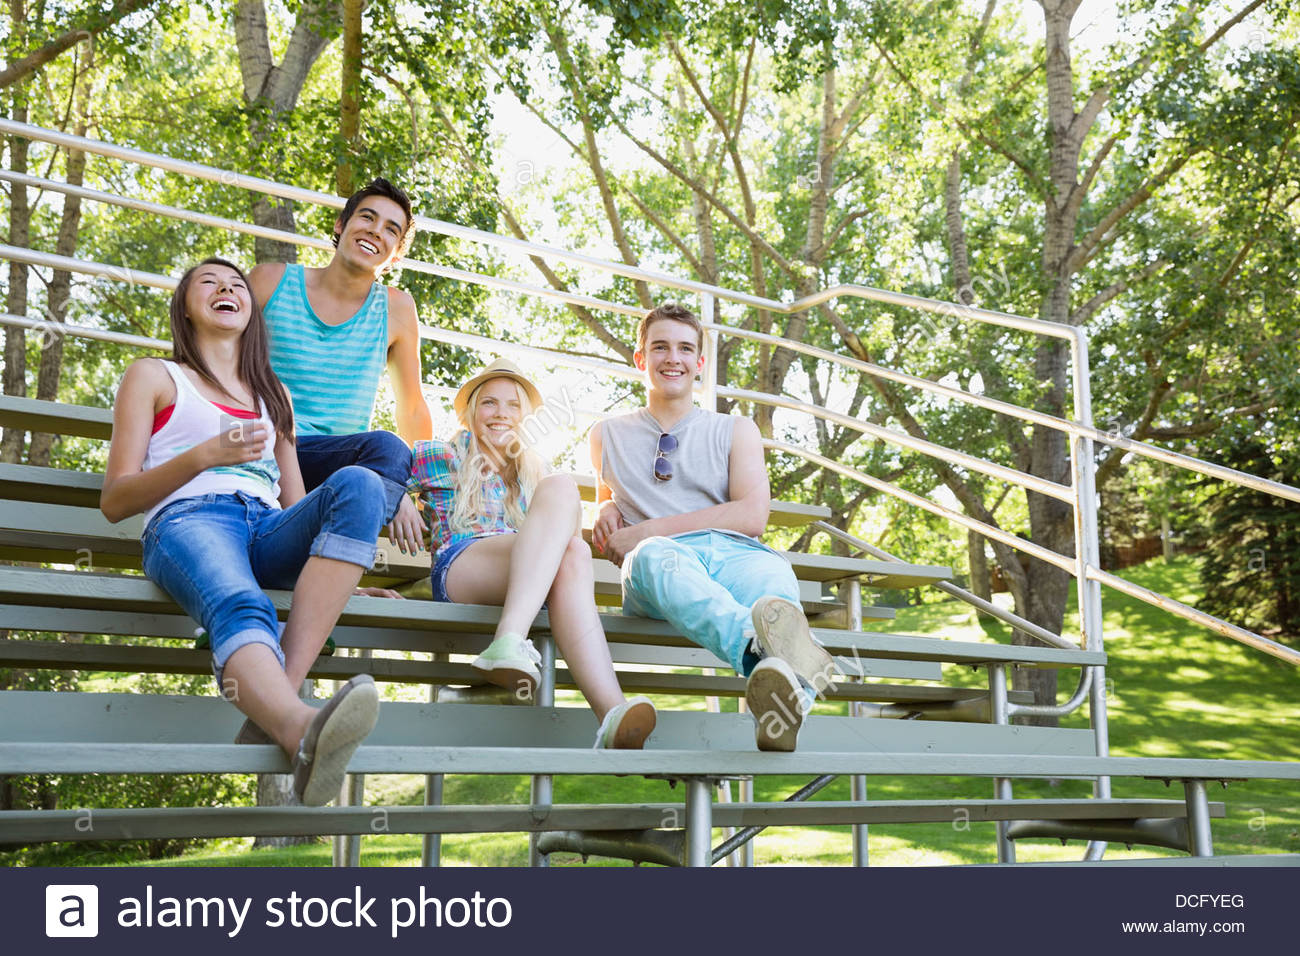 Teens sitting on bleachers in a park Stock Photo